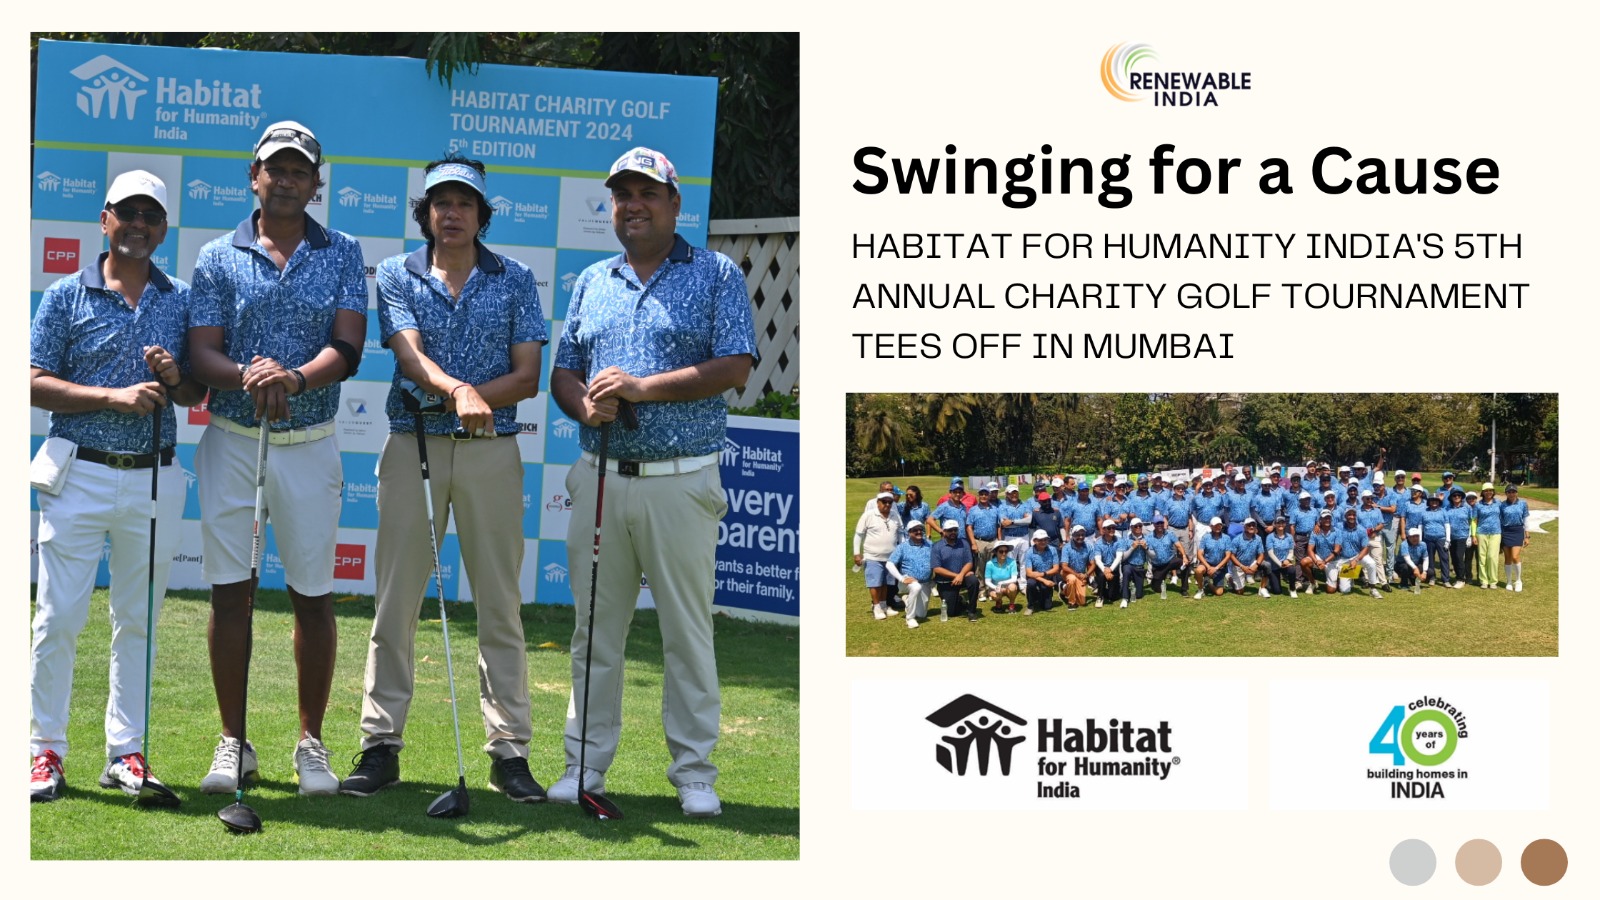 Habitat for Humanity India organises the 5th edition of its annual Charity Golf Tournament in Mumbai to support families in need of decent housing